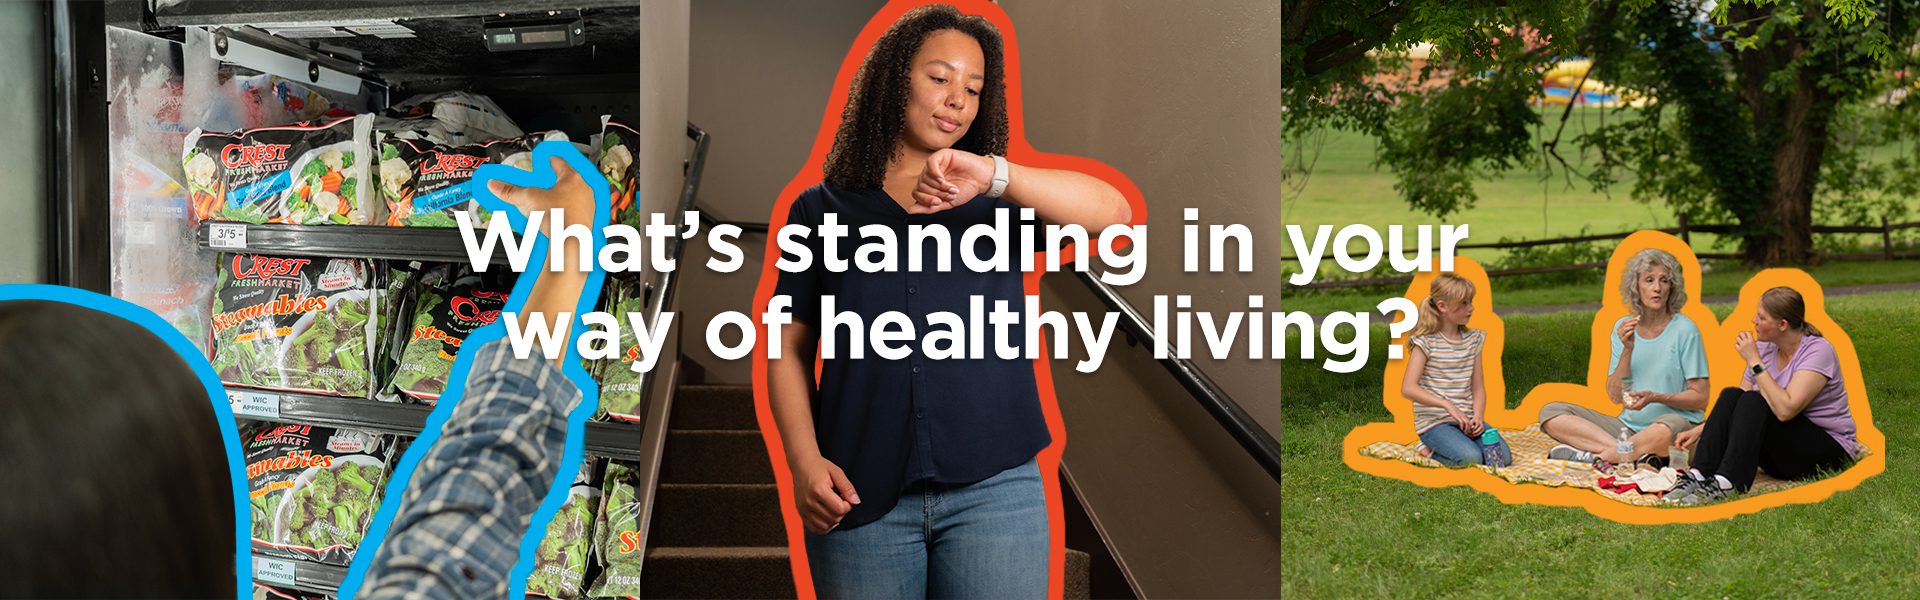 What’s standing in your way of healthy living?